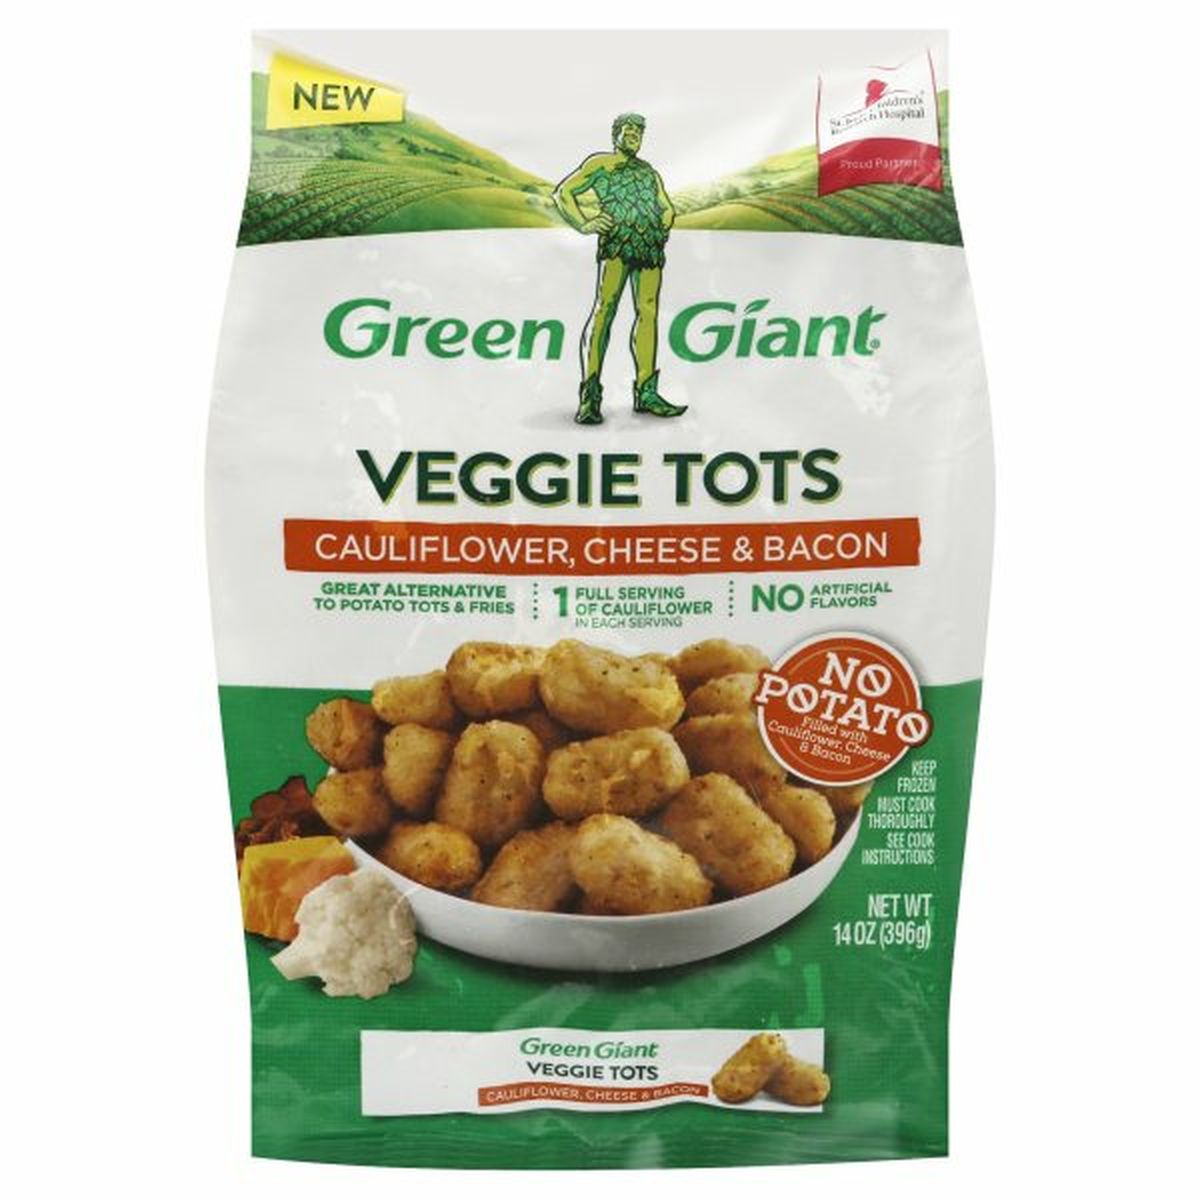 Calories in Green Giant Veggie Tots, Cauliflower, Cheese & Bacon